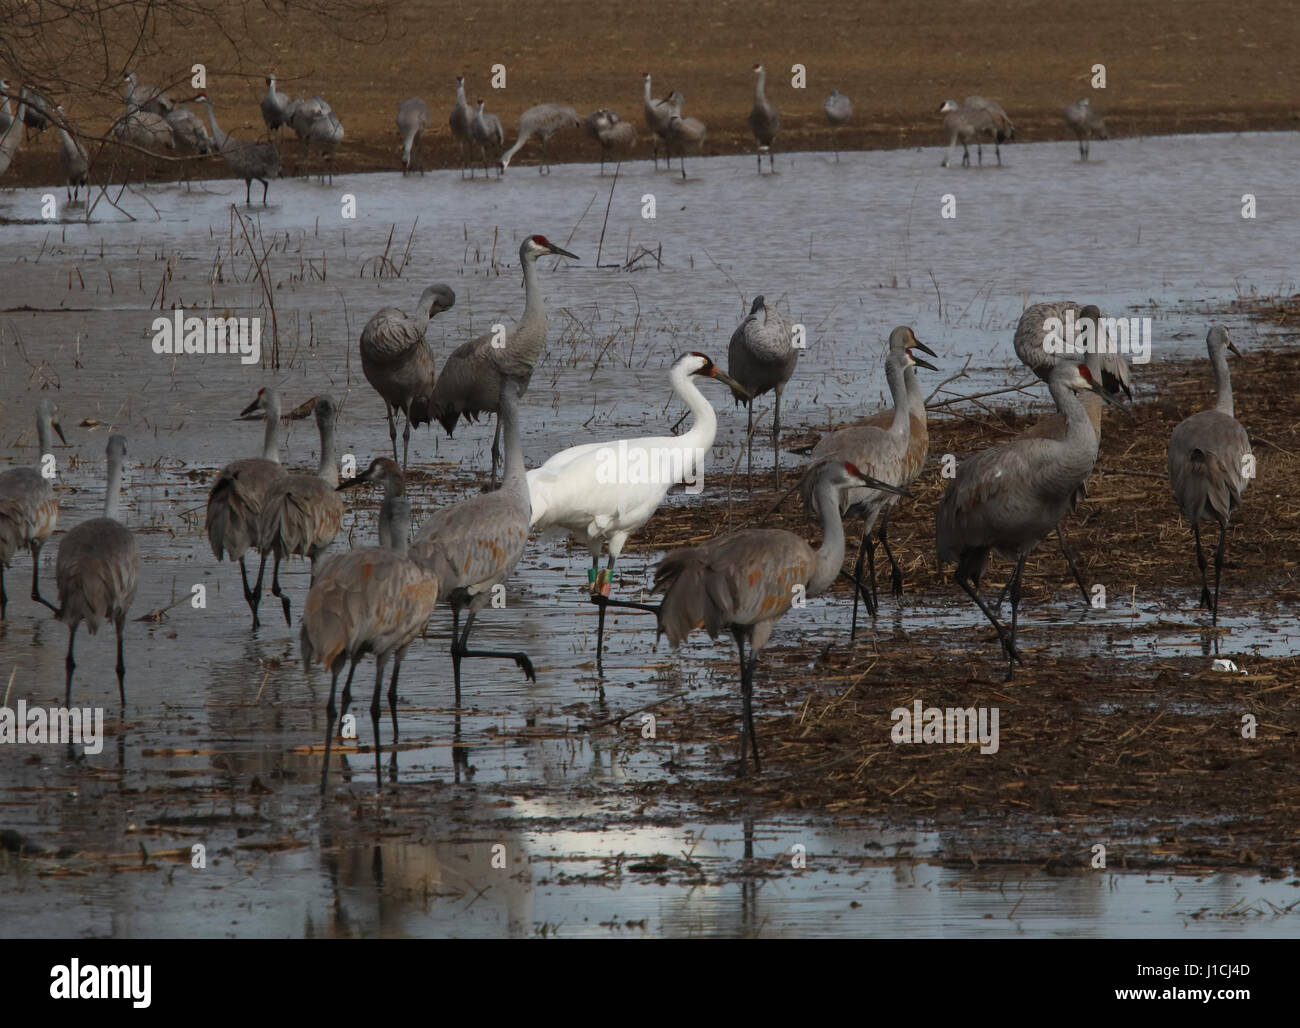 Whooping crane with sandhill cranes in Indiana wetland Stock Photo